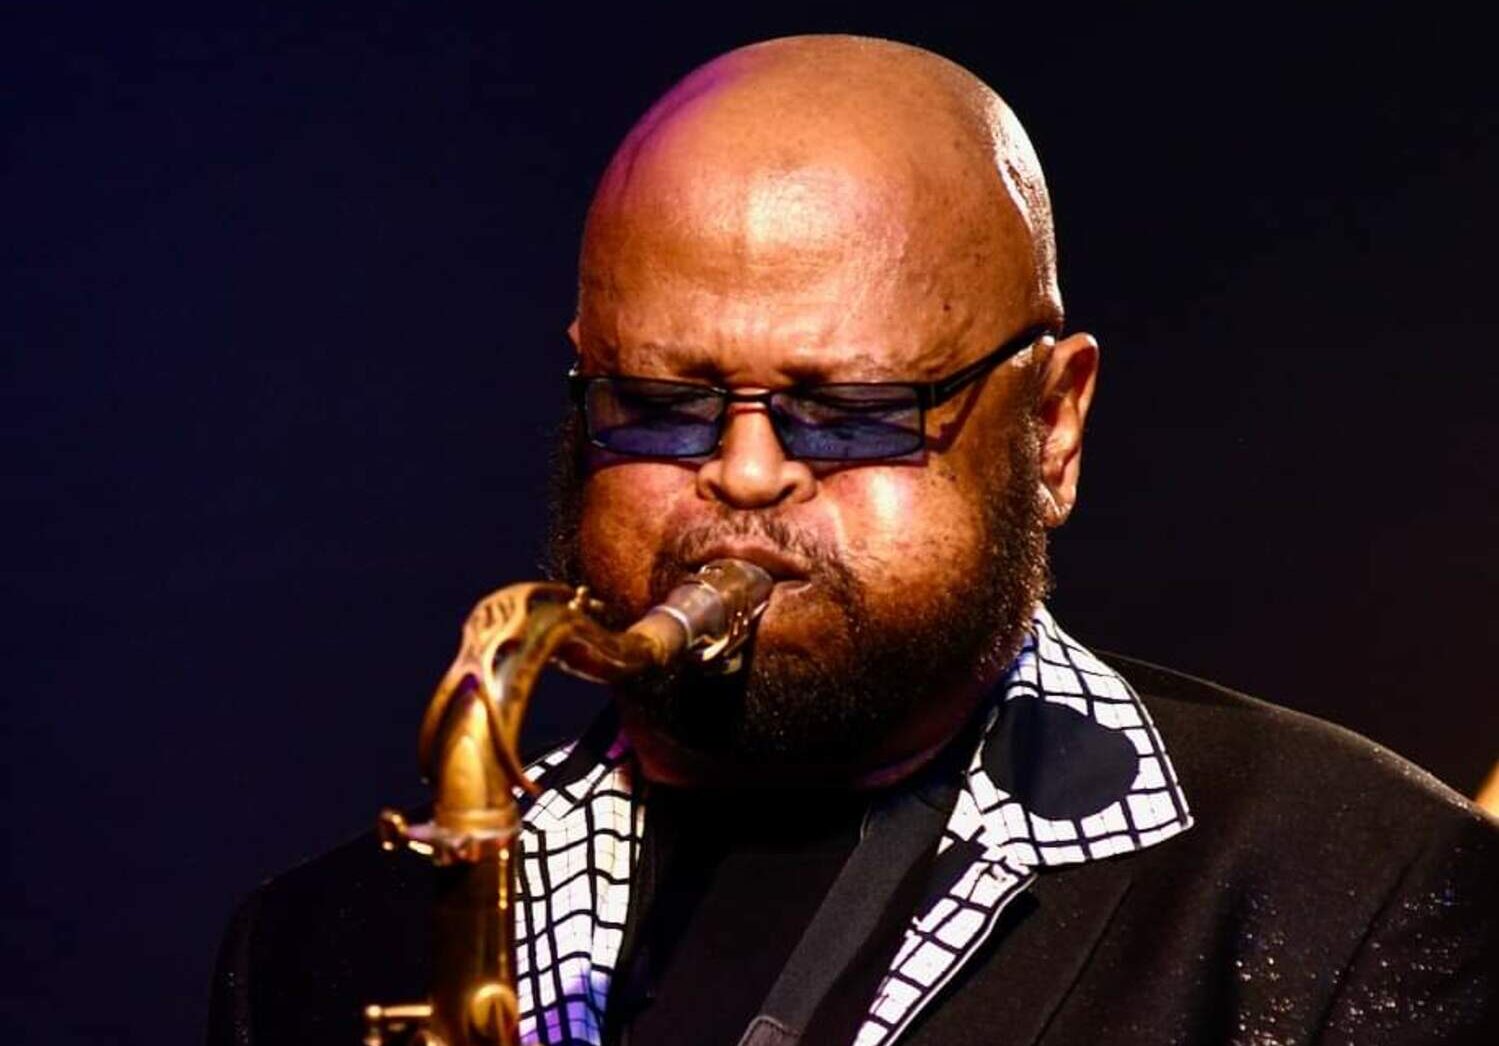 Jazz saxophonist Azar Lawrence and his quintet perform at the Southampton Arts Center on February 17 as part of Hamptons Jazz Fest. COURTESY THE ARTIST